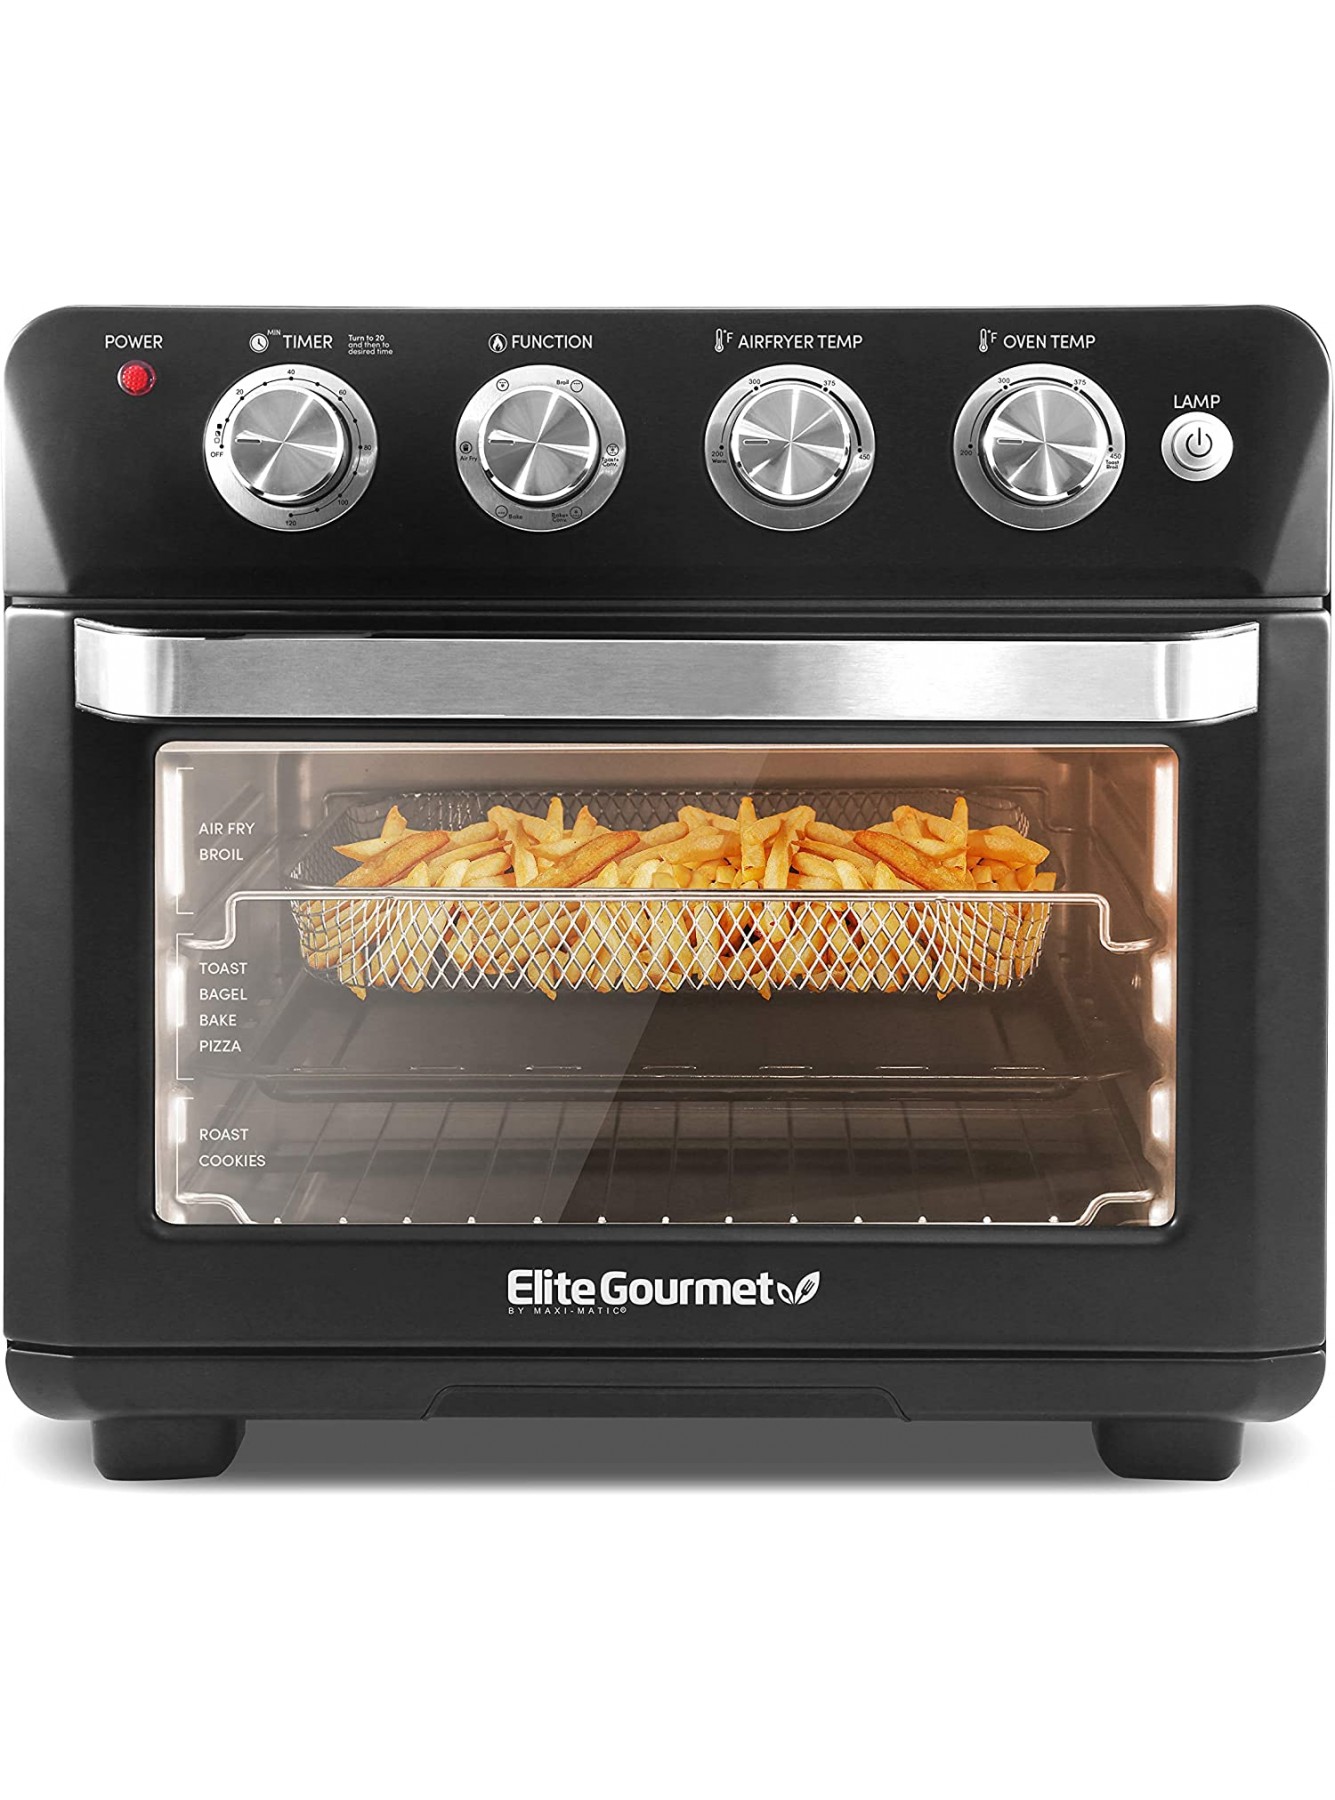 Elite Gourmet EAF9100 Electric 26.5 Quart Air Fryer Oven 1640 Watts Oil-Less Convection Oven 12 Pizza Extra Large Capacity Grill Bake Roast Air Fryer Black B08FTKFS7N